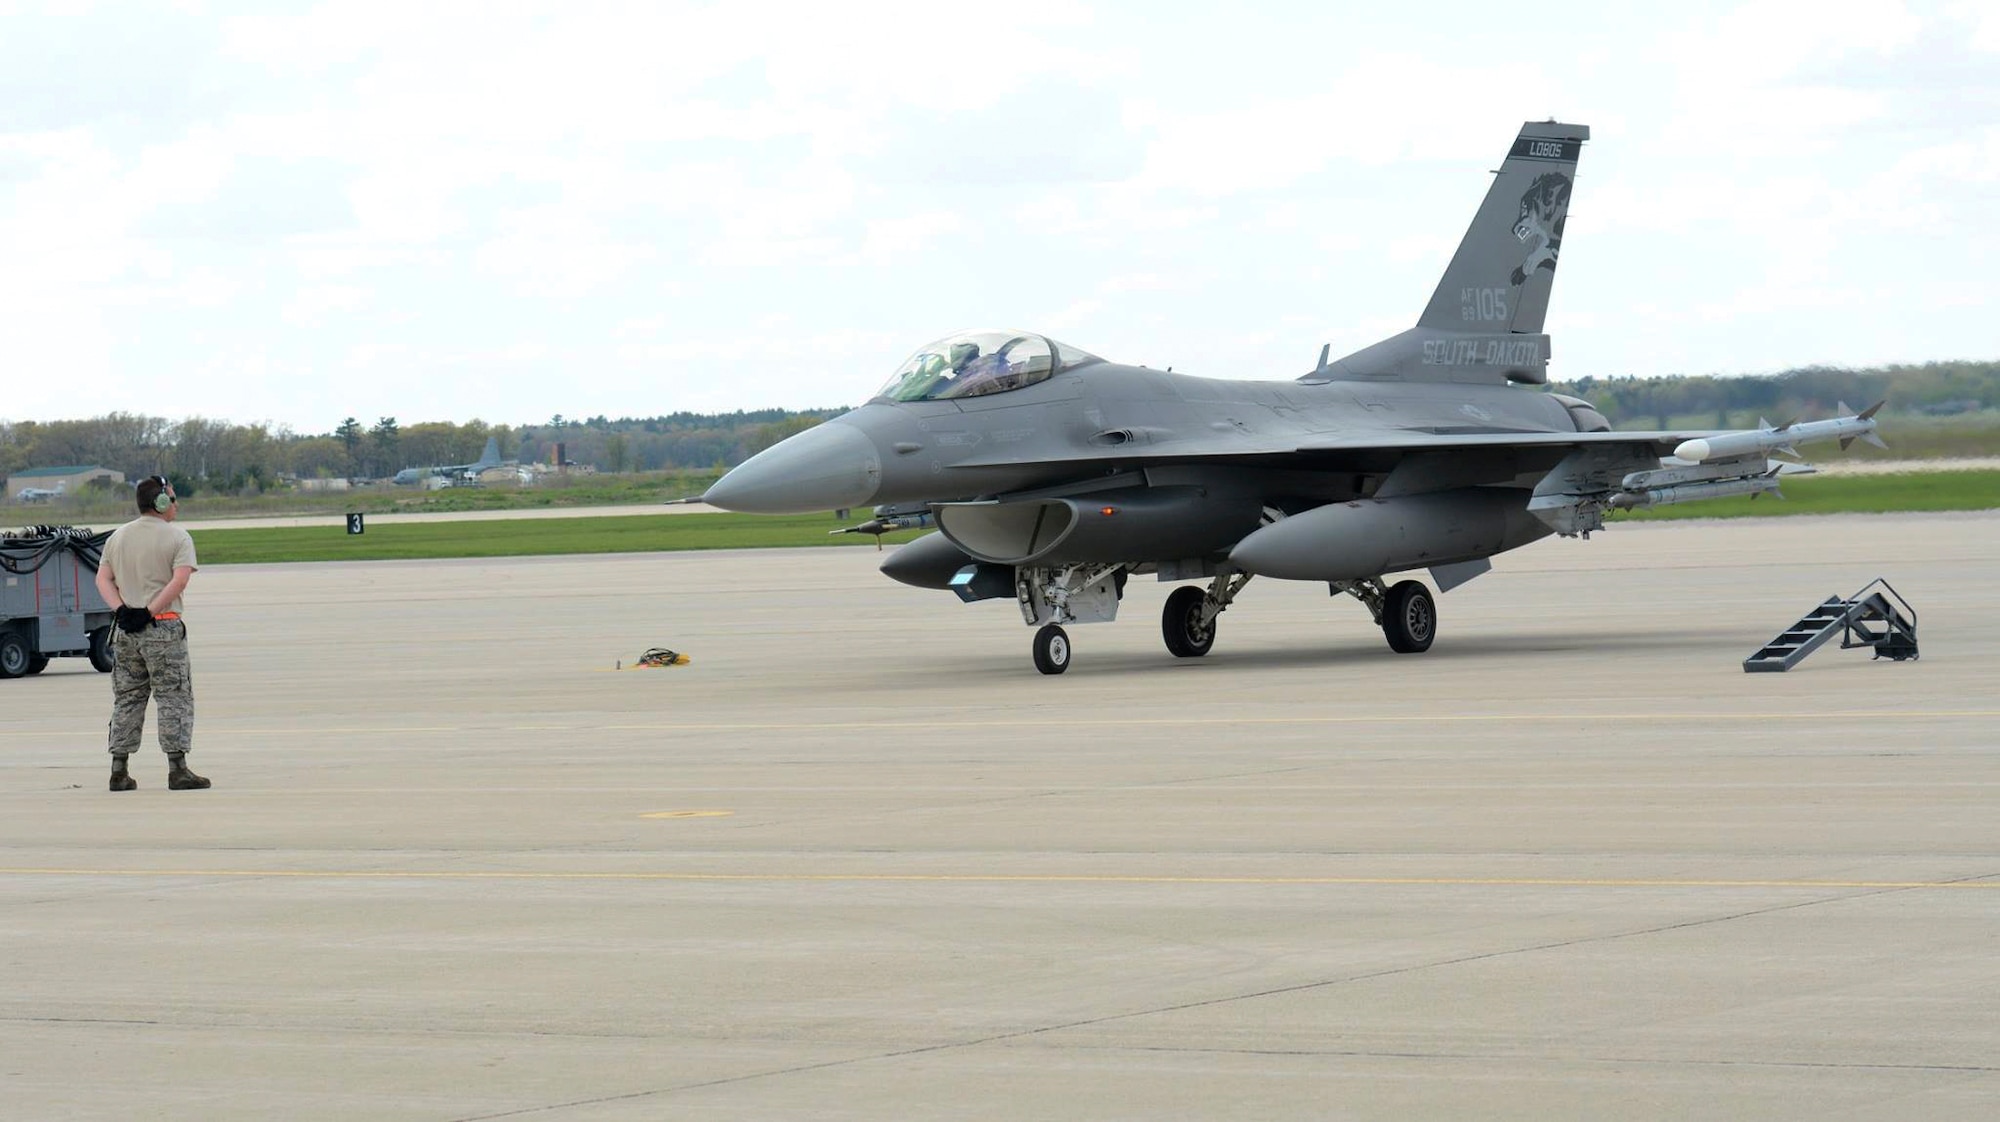 Master Sgt. Cameron Allsup, 114th Aircraft Maintenance Squadron crew chief, prepares to launch an F-16 during Exercise Northern Lightning at Volk Field Combat Readiness Training Center, Camp Douglas, Wisconsin, May 1-12, 2017. Northern Lightning is an exercise involving around 1,500 service members from the Air Force, Navy, Marines and National Guard across the country. (U.S. Air National Guard photo by Staff Sgt. Andrea F. Rhode/Released)